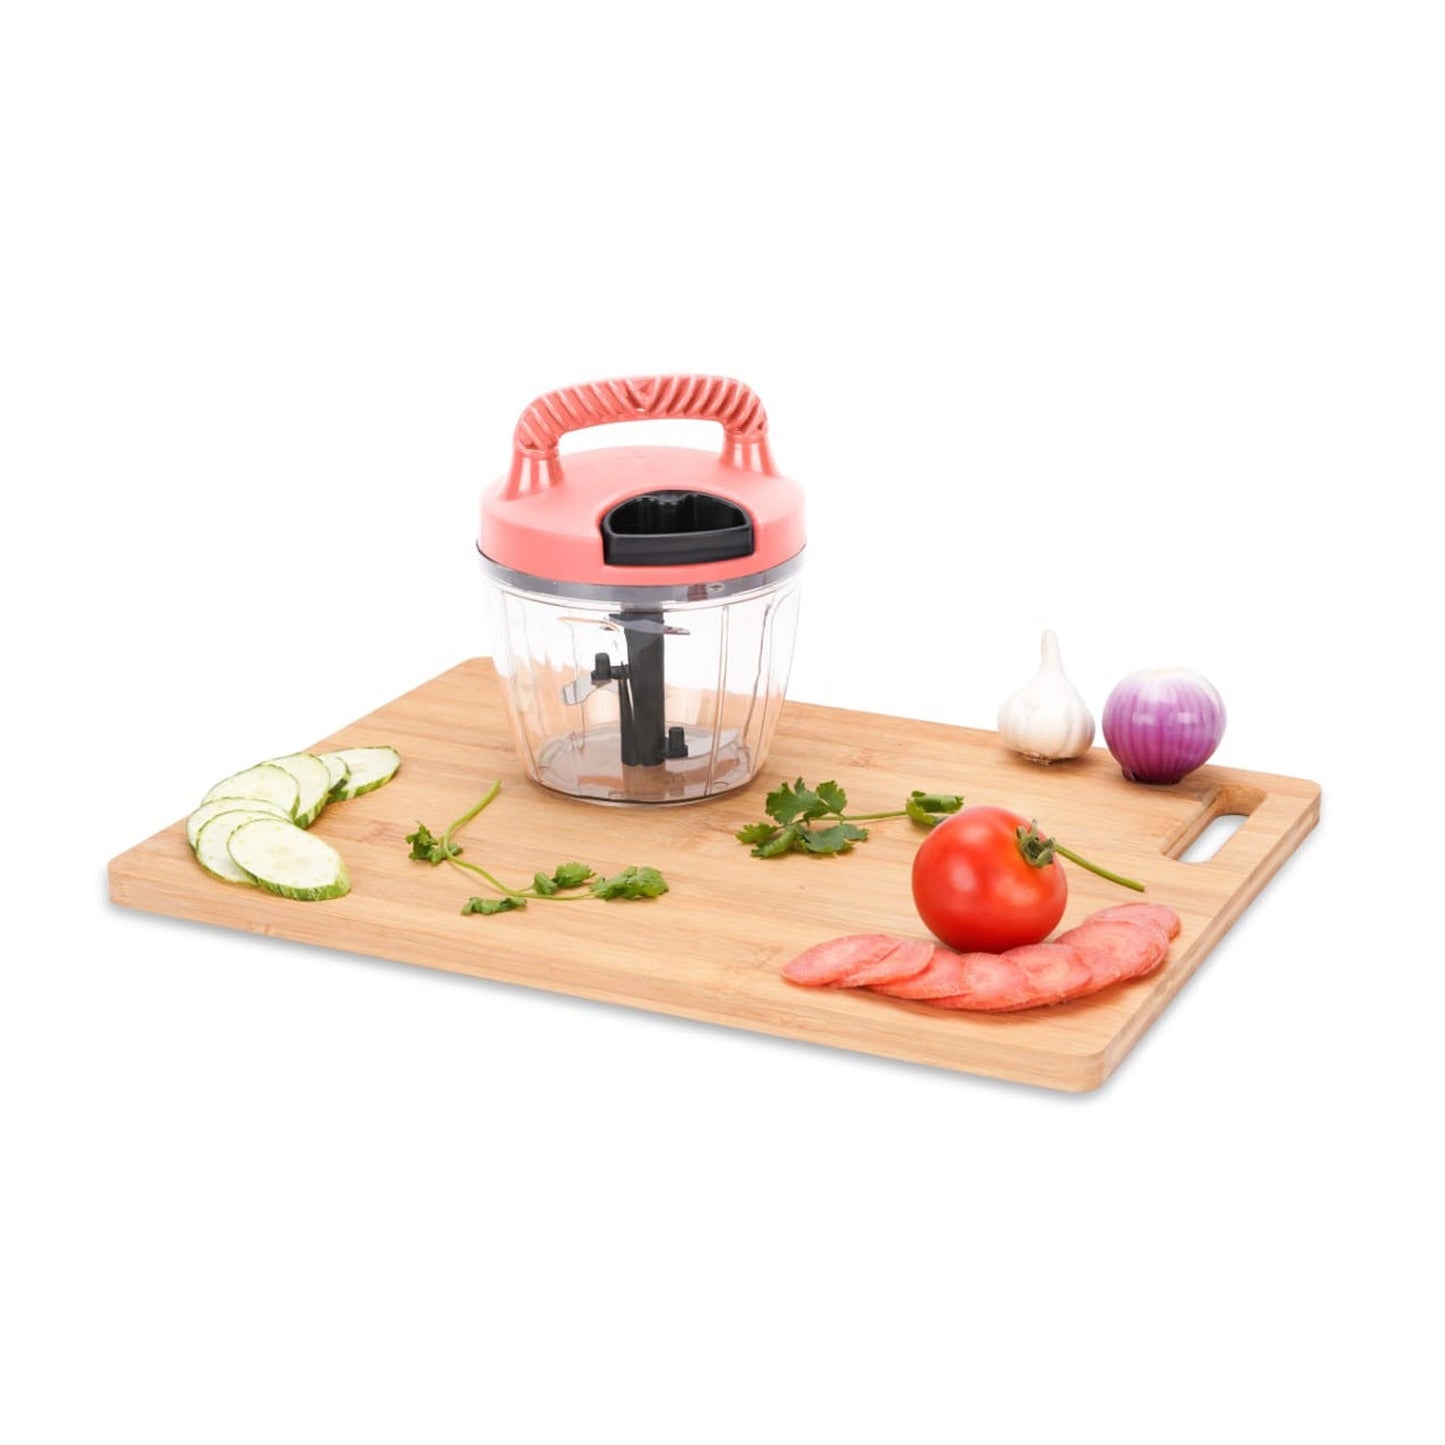 2714 2 in 1 Handy Chopper 1000 ML used widely in all kinds of household kitchen purposes for cutting and chopping of types of vegetables and fruits etc. DeoDap